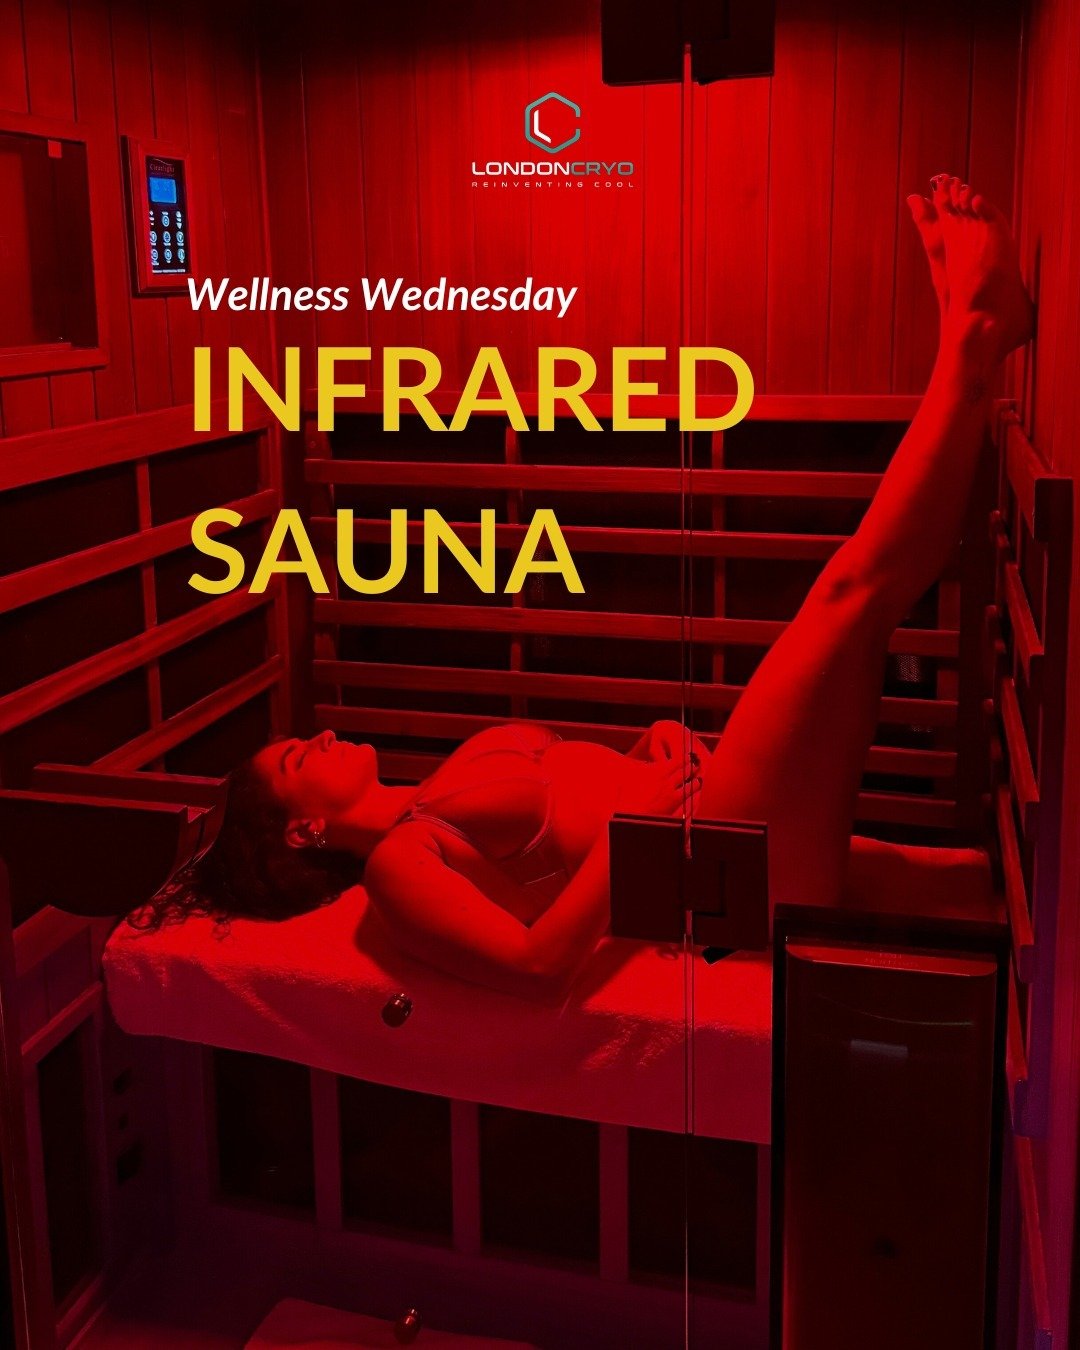 Heat up your wellness routine with Infrared Sauna Therapy 🔥 ⁠
⁠
Experience detoxification and enjoy improved blood flow and deep muscle relaxation. Discover the therapeutic benefits of LondonCryo&rsquo;s infrared sauna.
⁠
Book your session today! Li